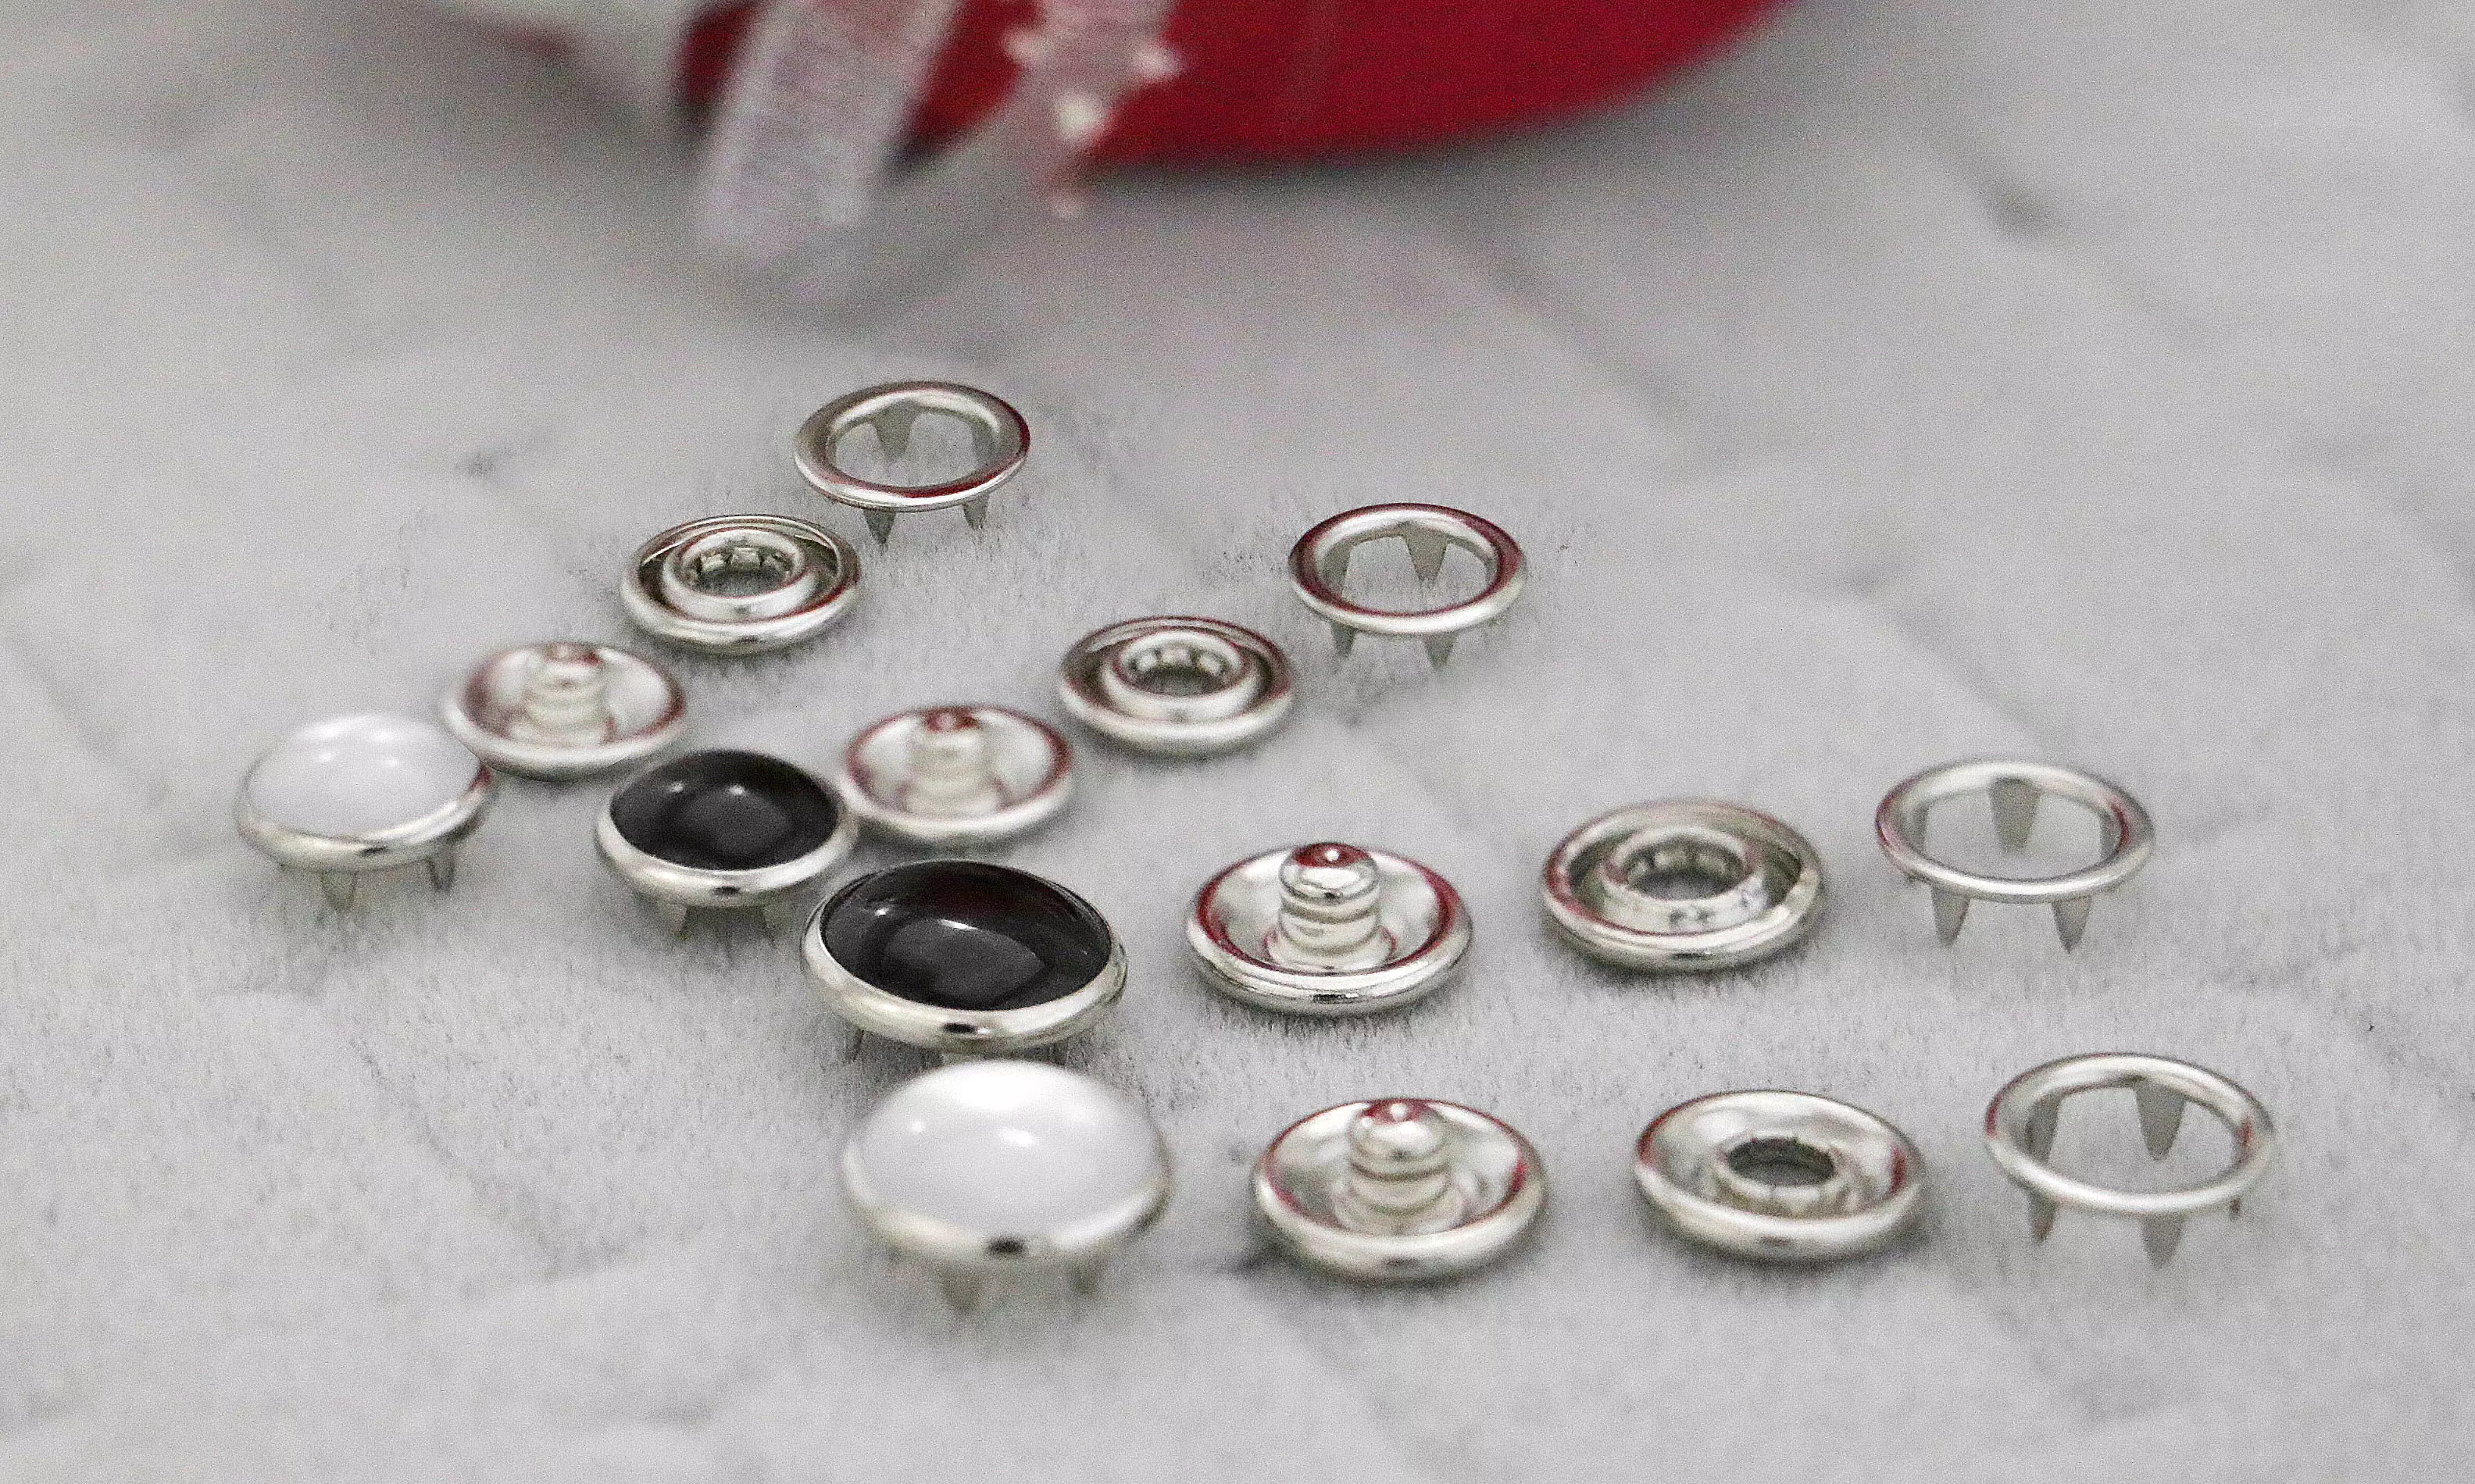  Pearl Snaps Fasteners Kit,10mm Clothes Ring for